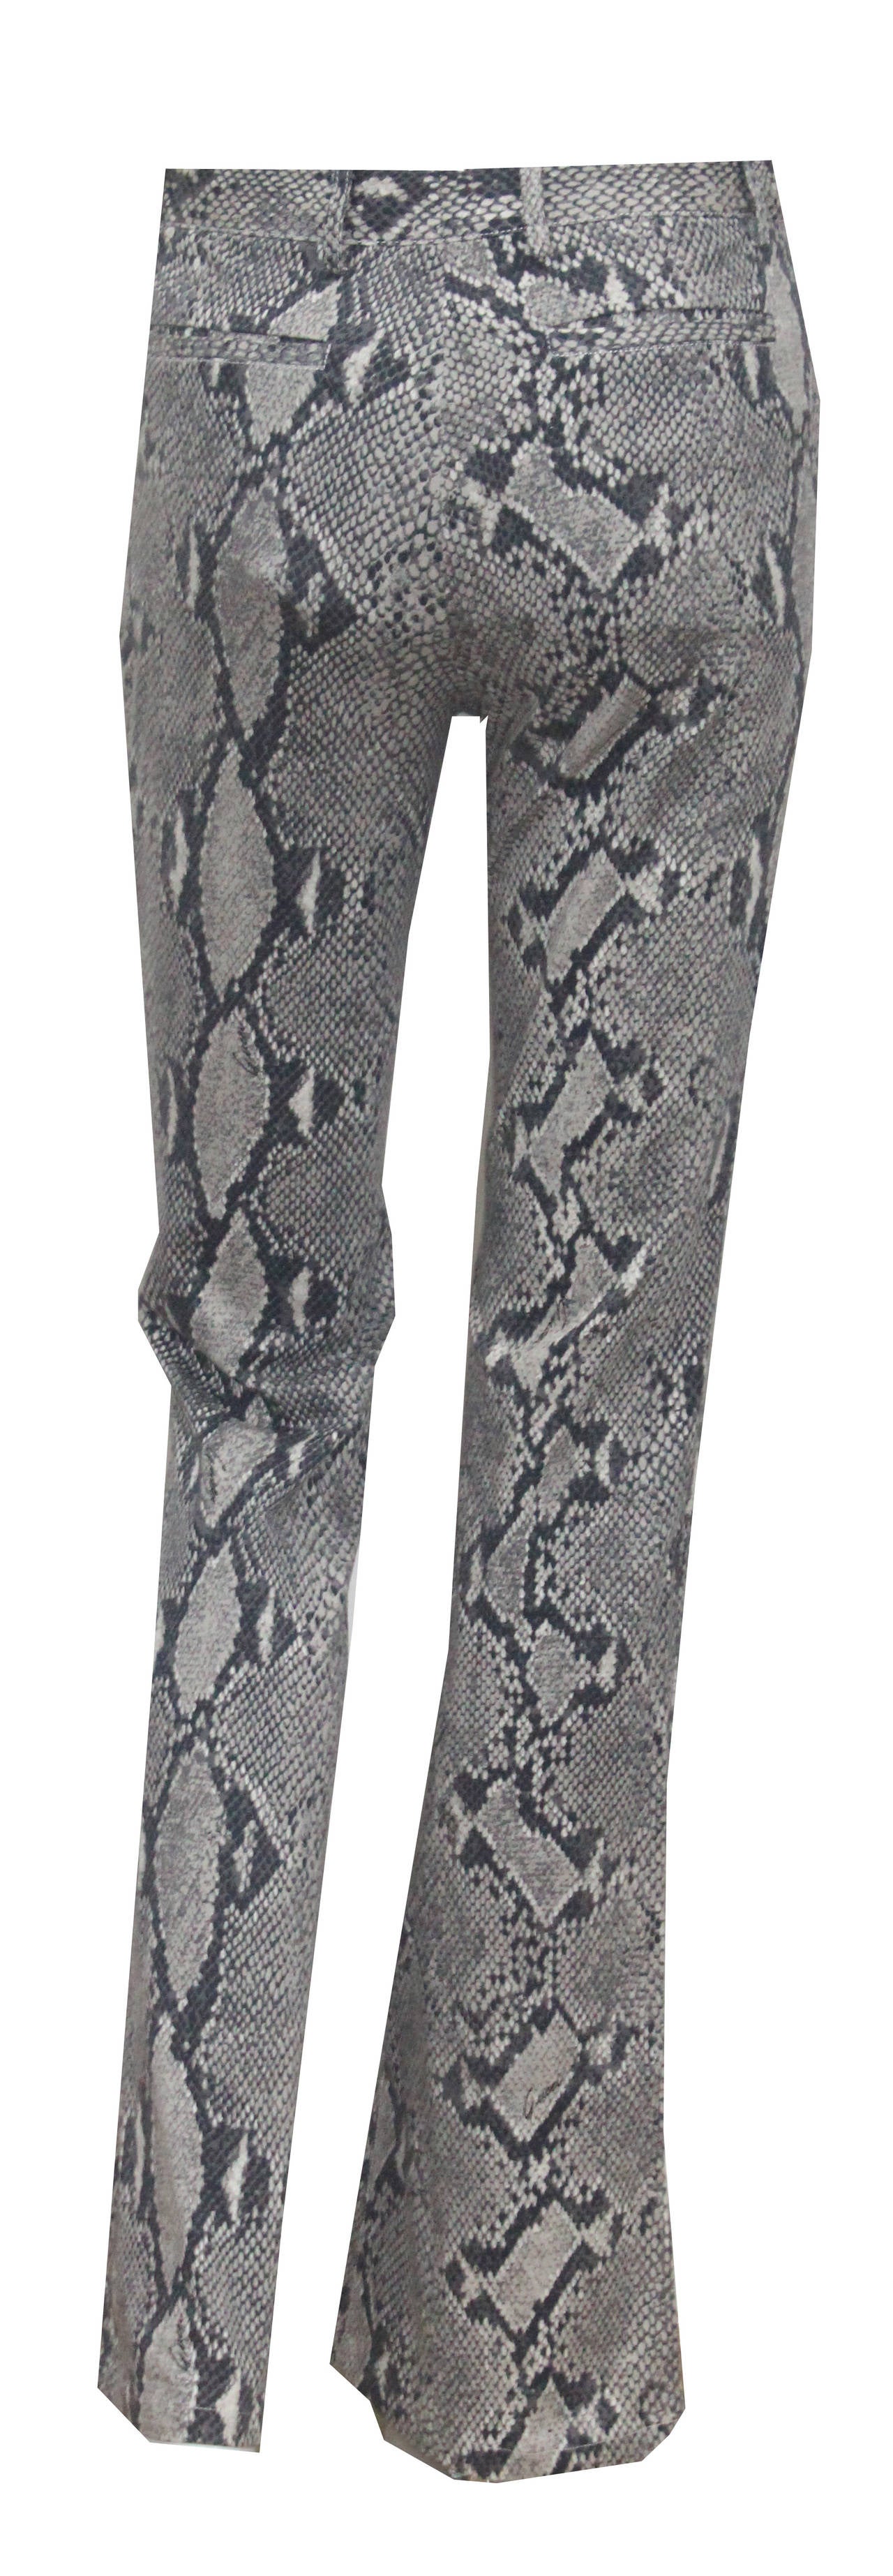 Iconic Tom Ford for Gucci Snakeskin Print Bell Bottom Flares c. 2000 In Excellent Condition In London, GB